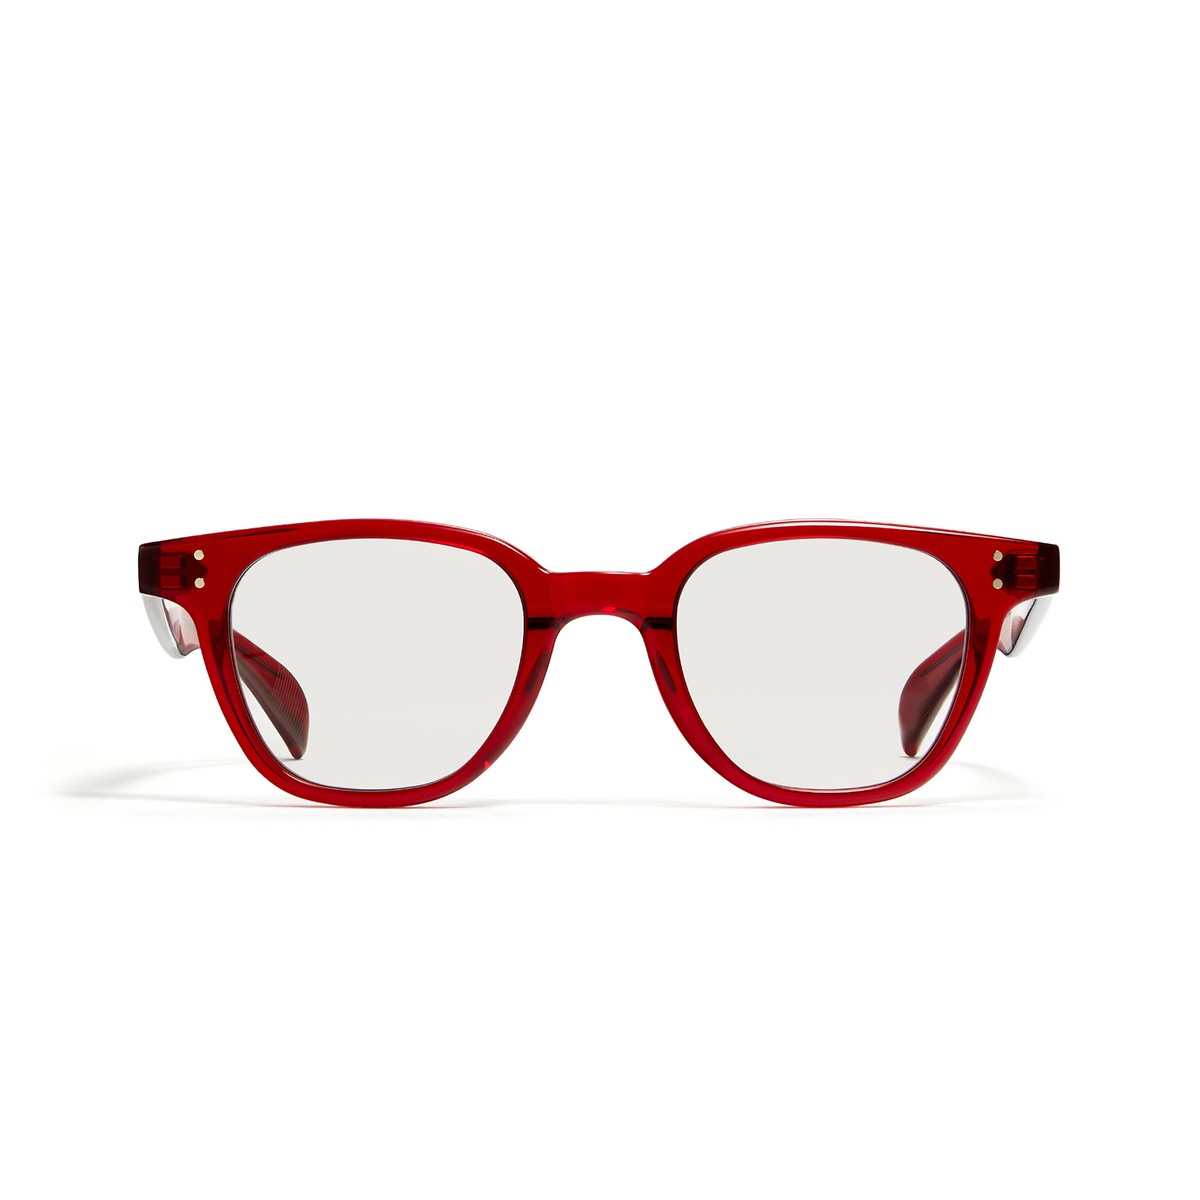 Gentle Monster® Square Eyeglasses: Dadio color Red RC1 - front view.